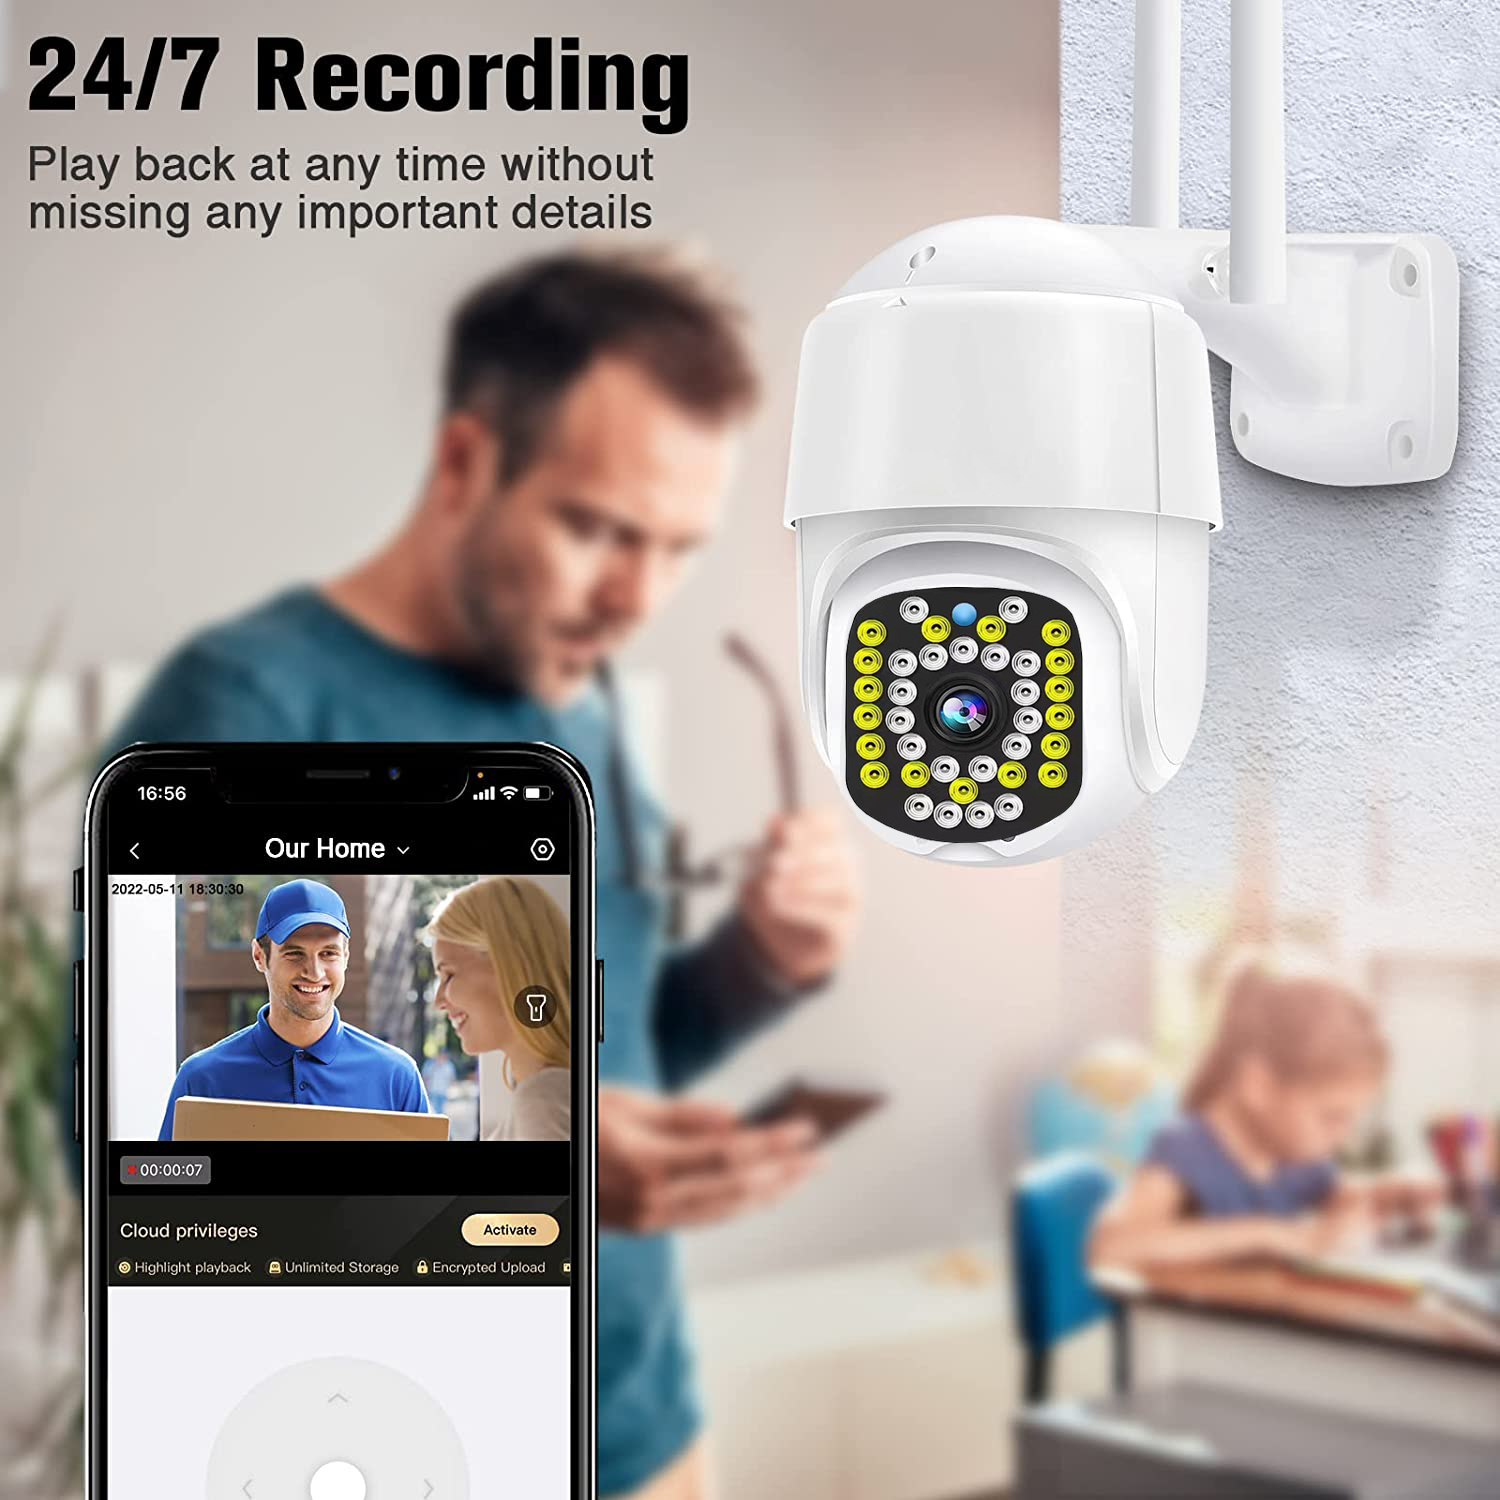 Security-Cameras-3MP-Security-Camera-WiFi-Camera-Outdoor-Home-Security-Camera-with-Spotlight-Night-Vision-Alarm-Remote-Access-Motion-Detection-Waterproof-2-Way-Audio-21